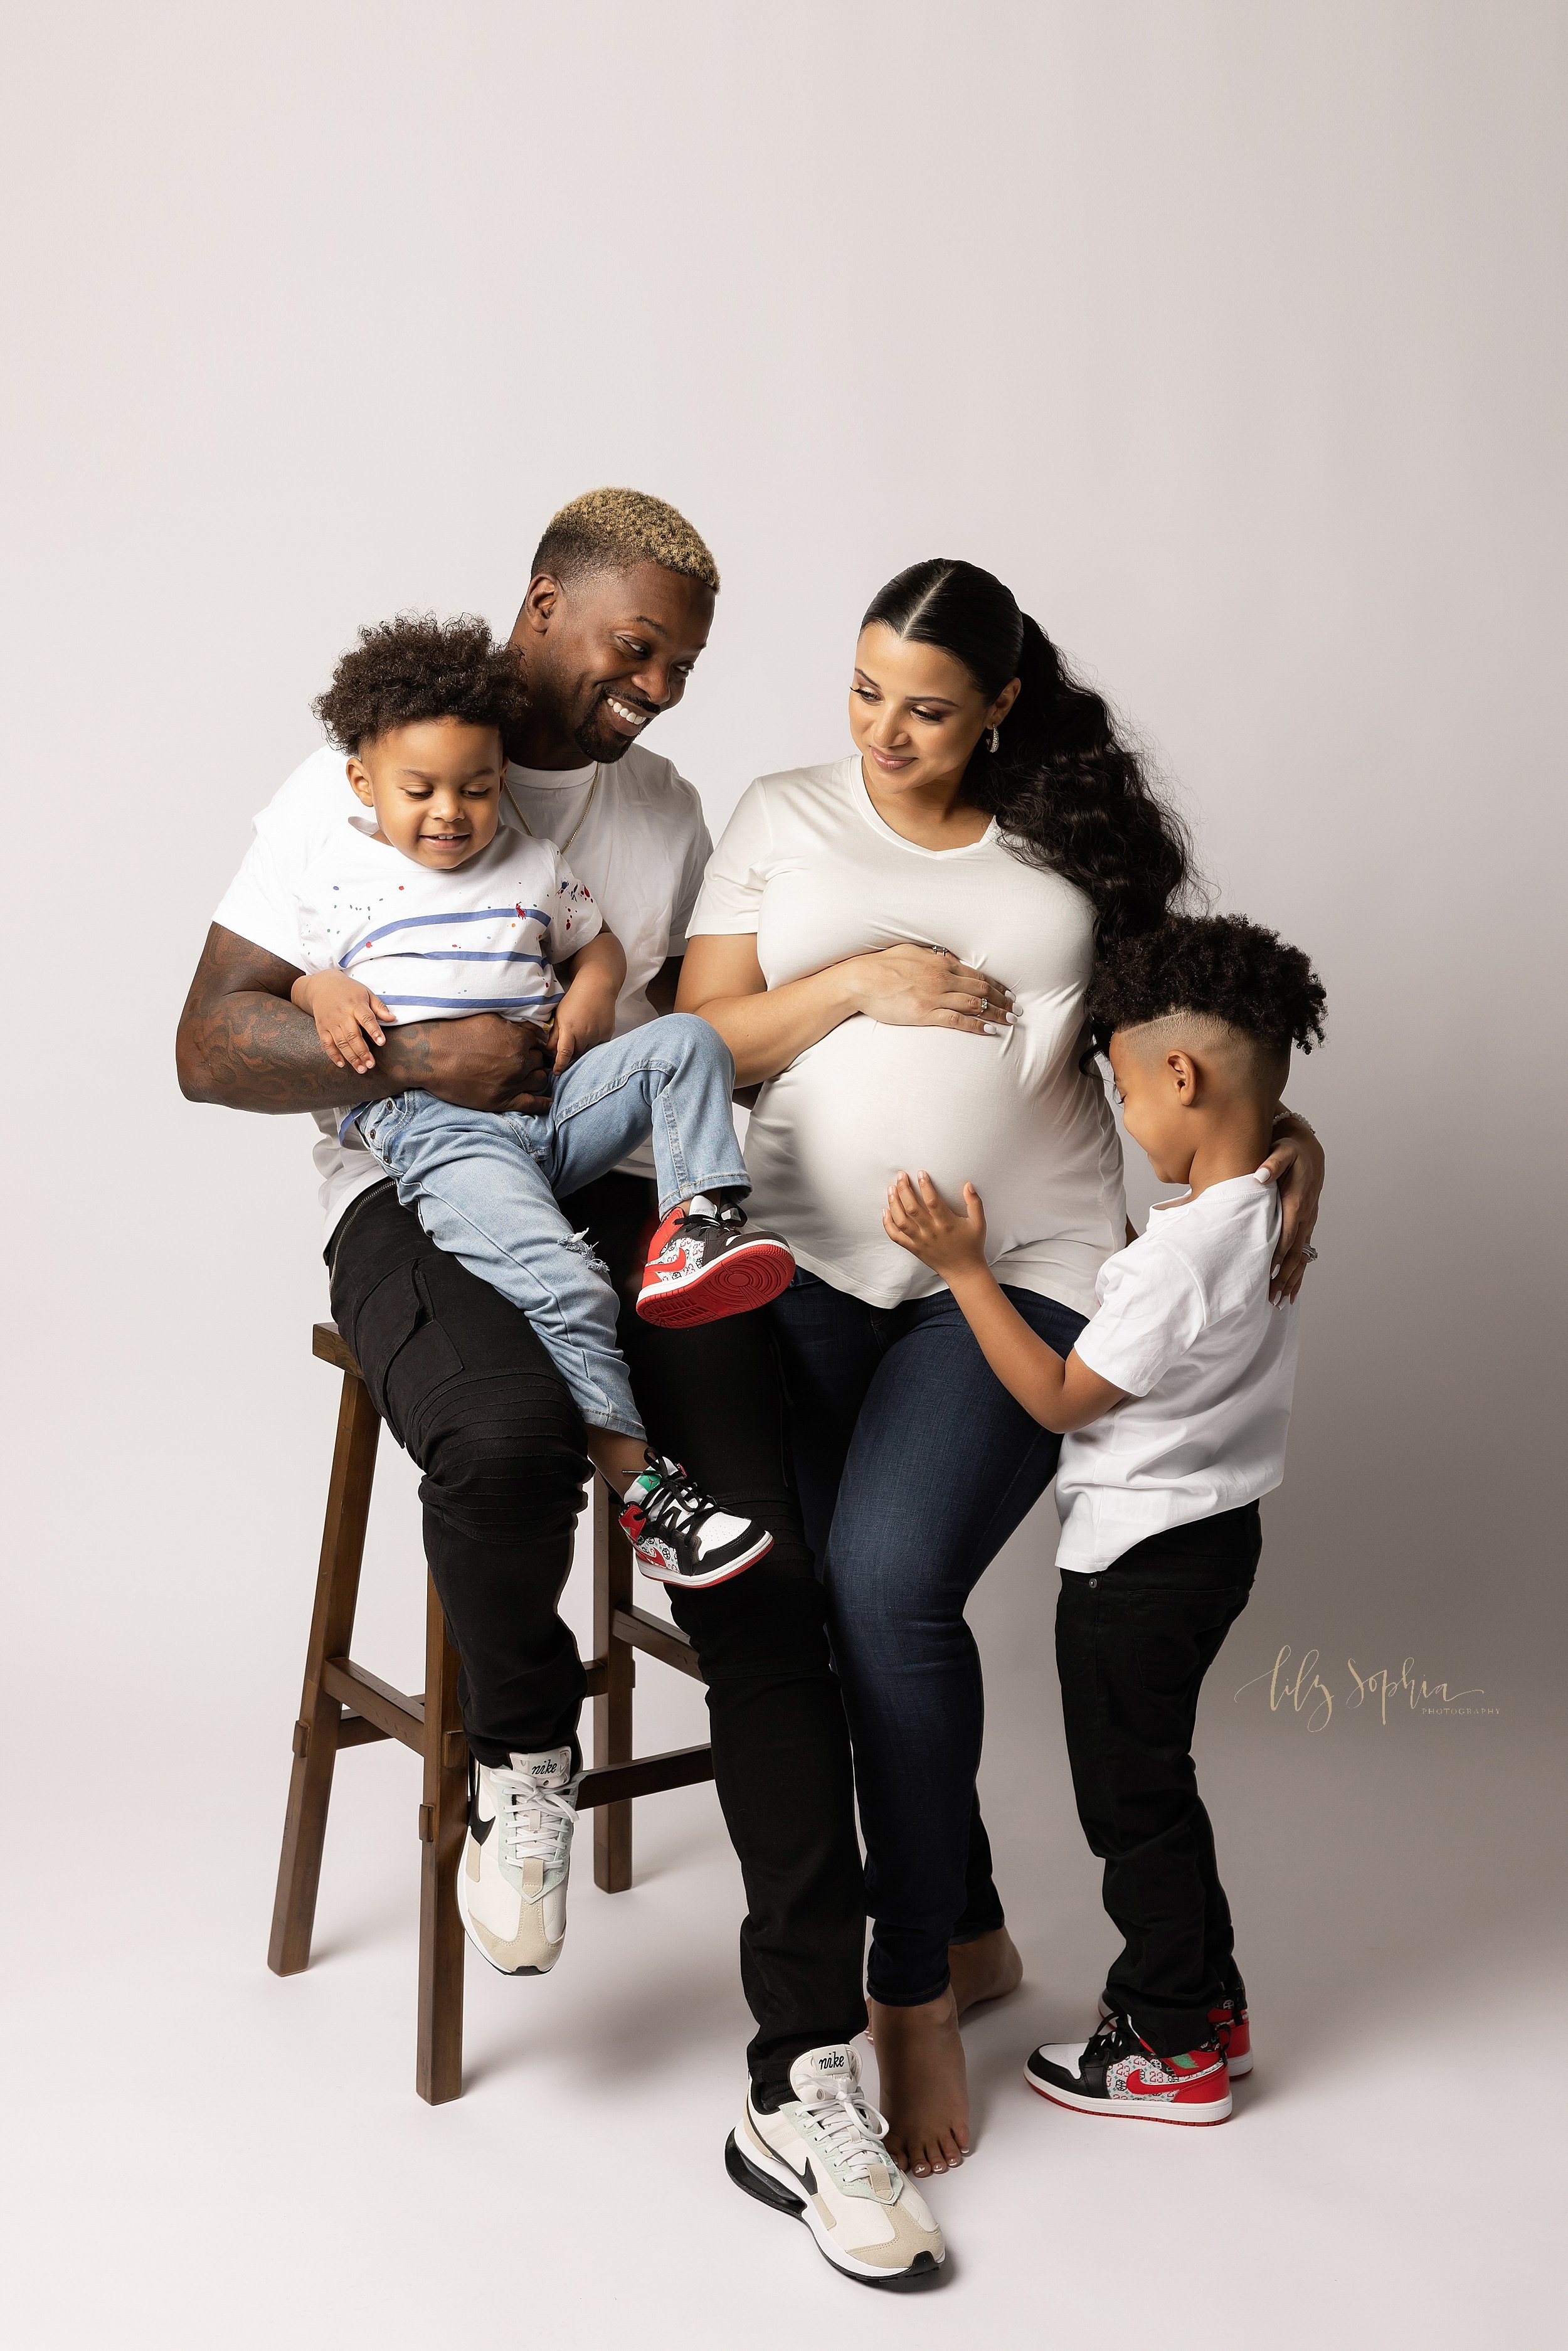  Family maternity portrait with dad sitting on a wooden stool and holding his young son on his lap as he sits next to his pregnant wife sitting on another stool with her right hand on top of her belly and her left hand on her older son’s shoulder as 